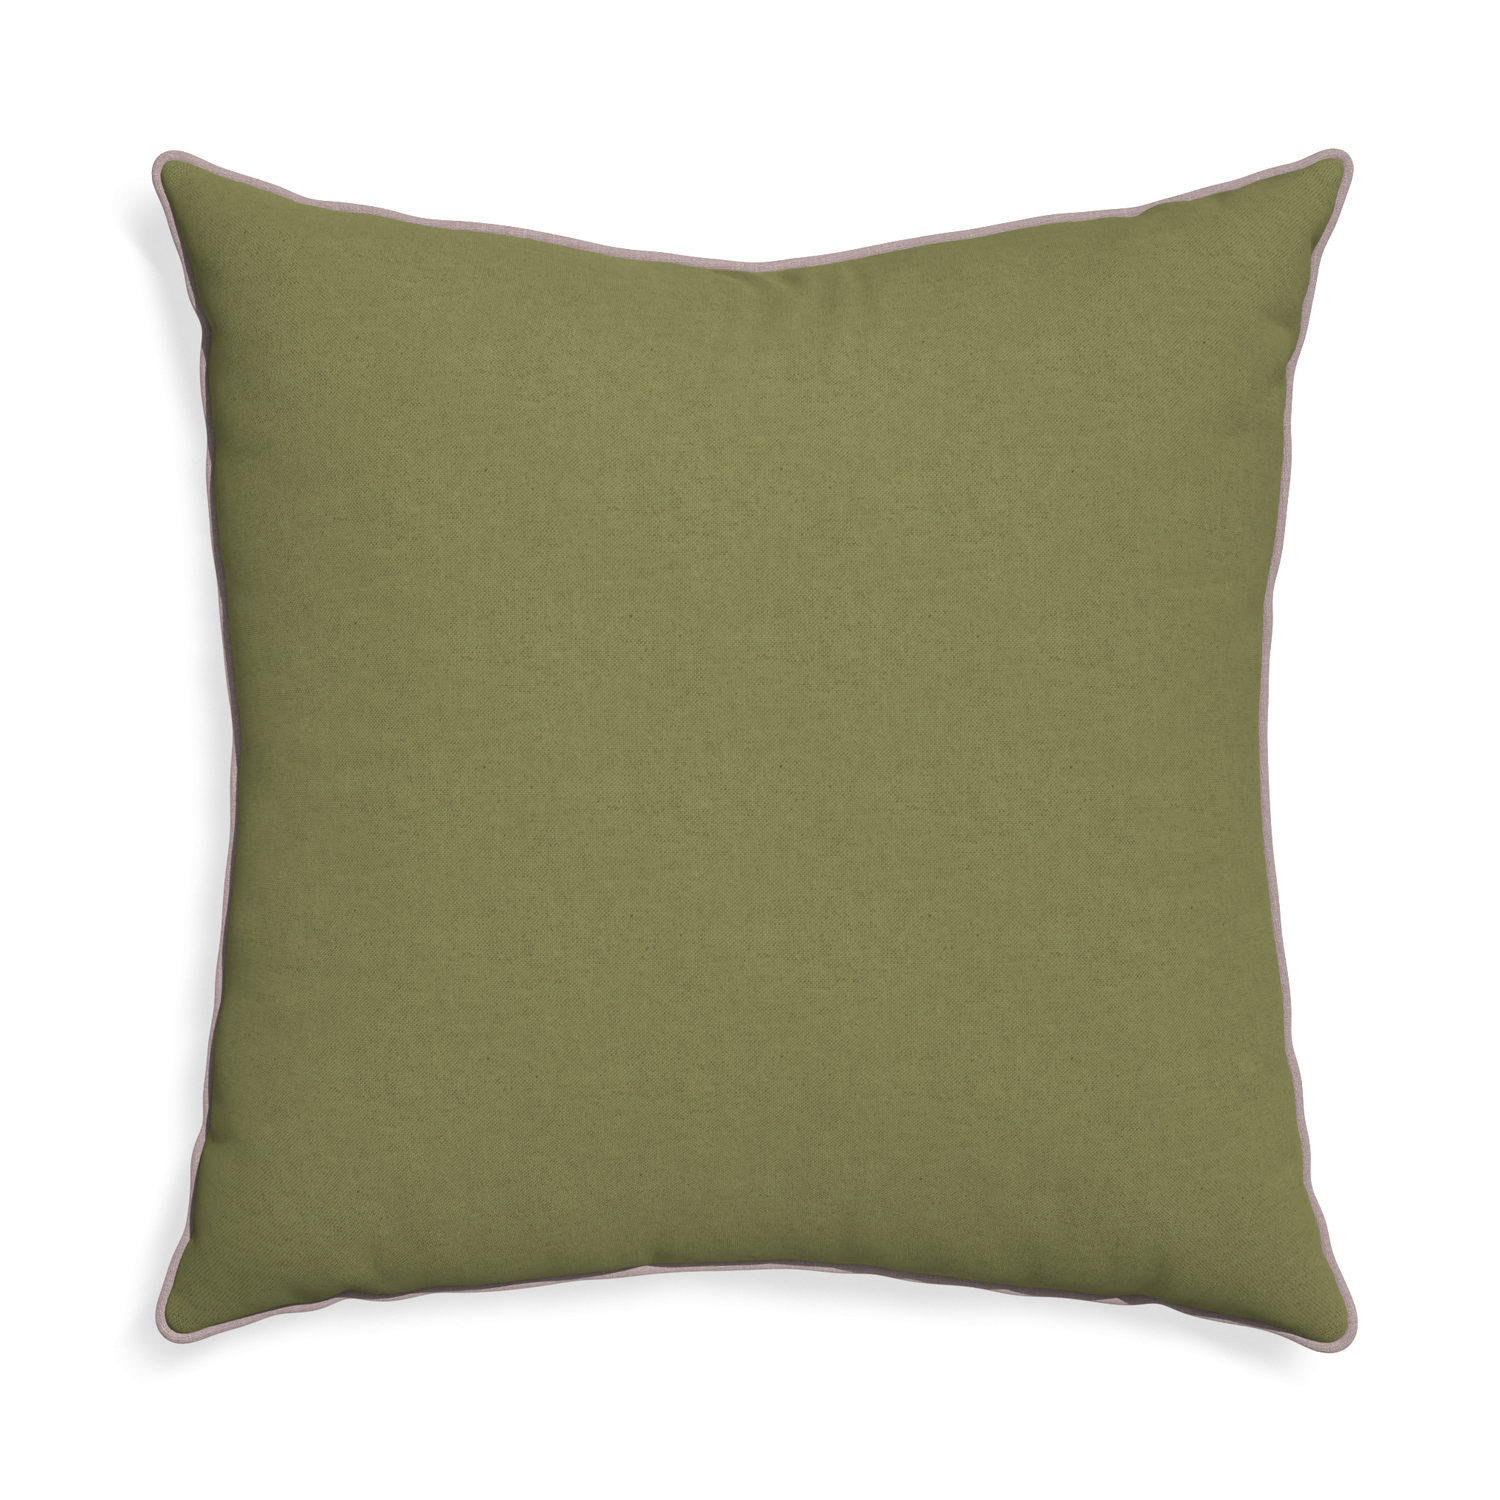 Euro-sham moss custom moss greenpillow with orchid piping on white background